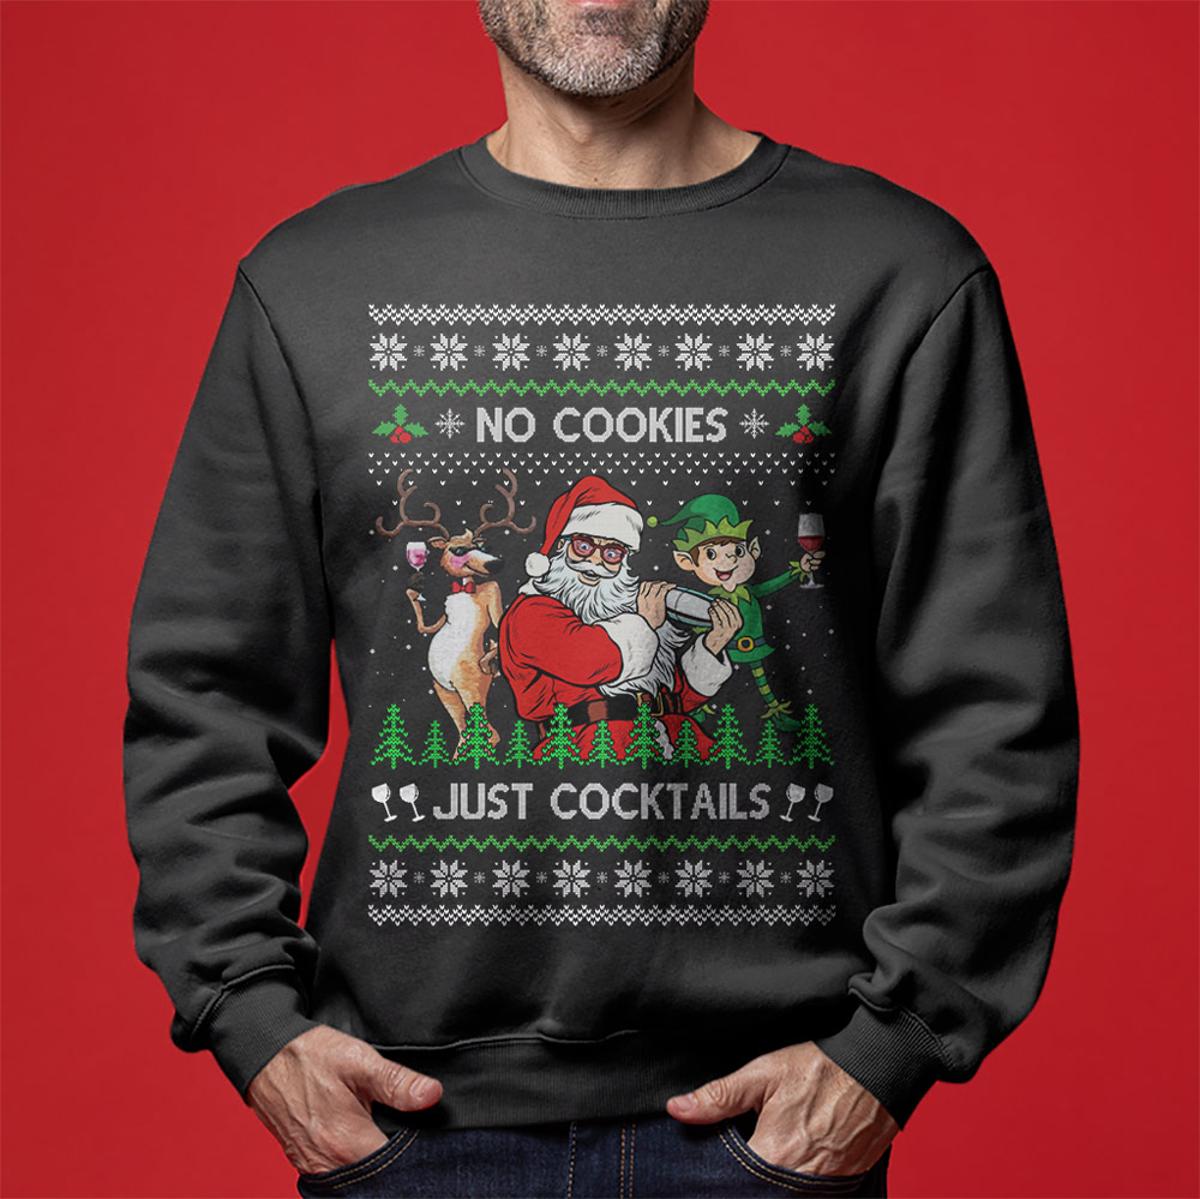 Raging Bull Ugly Sweater